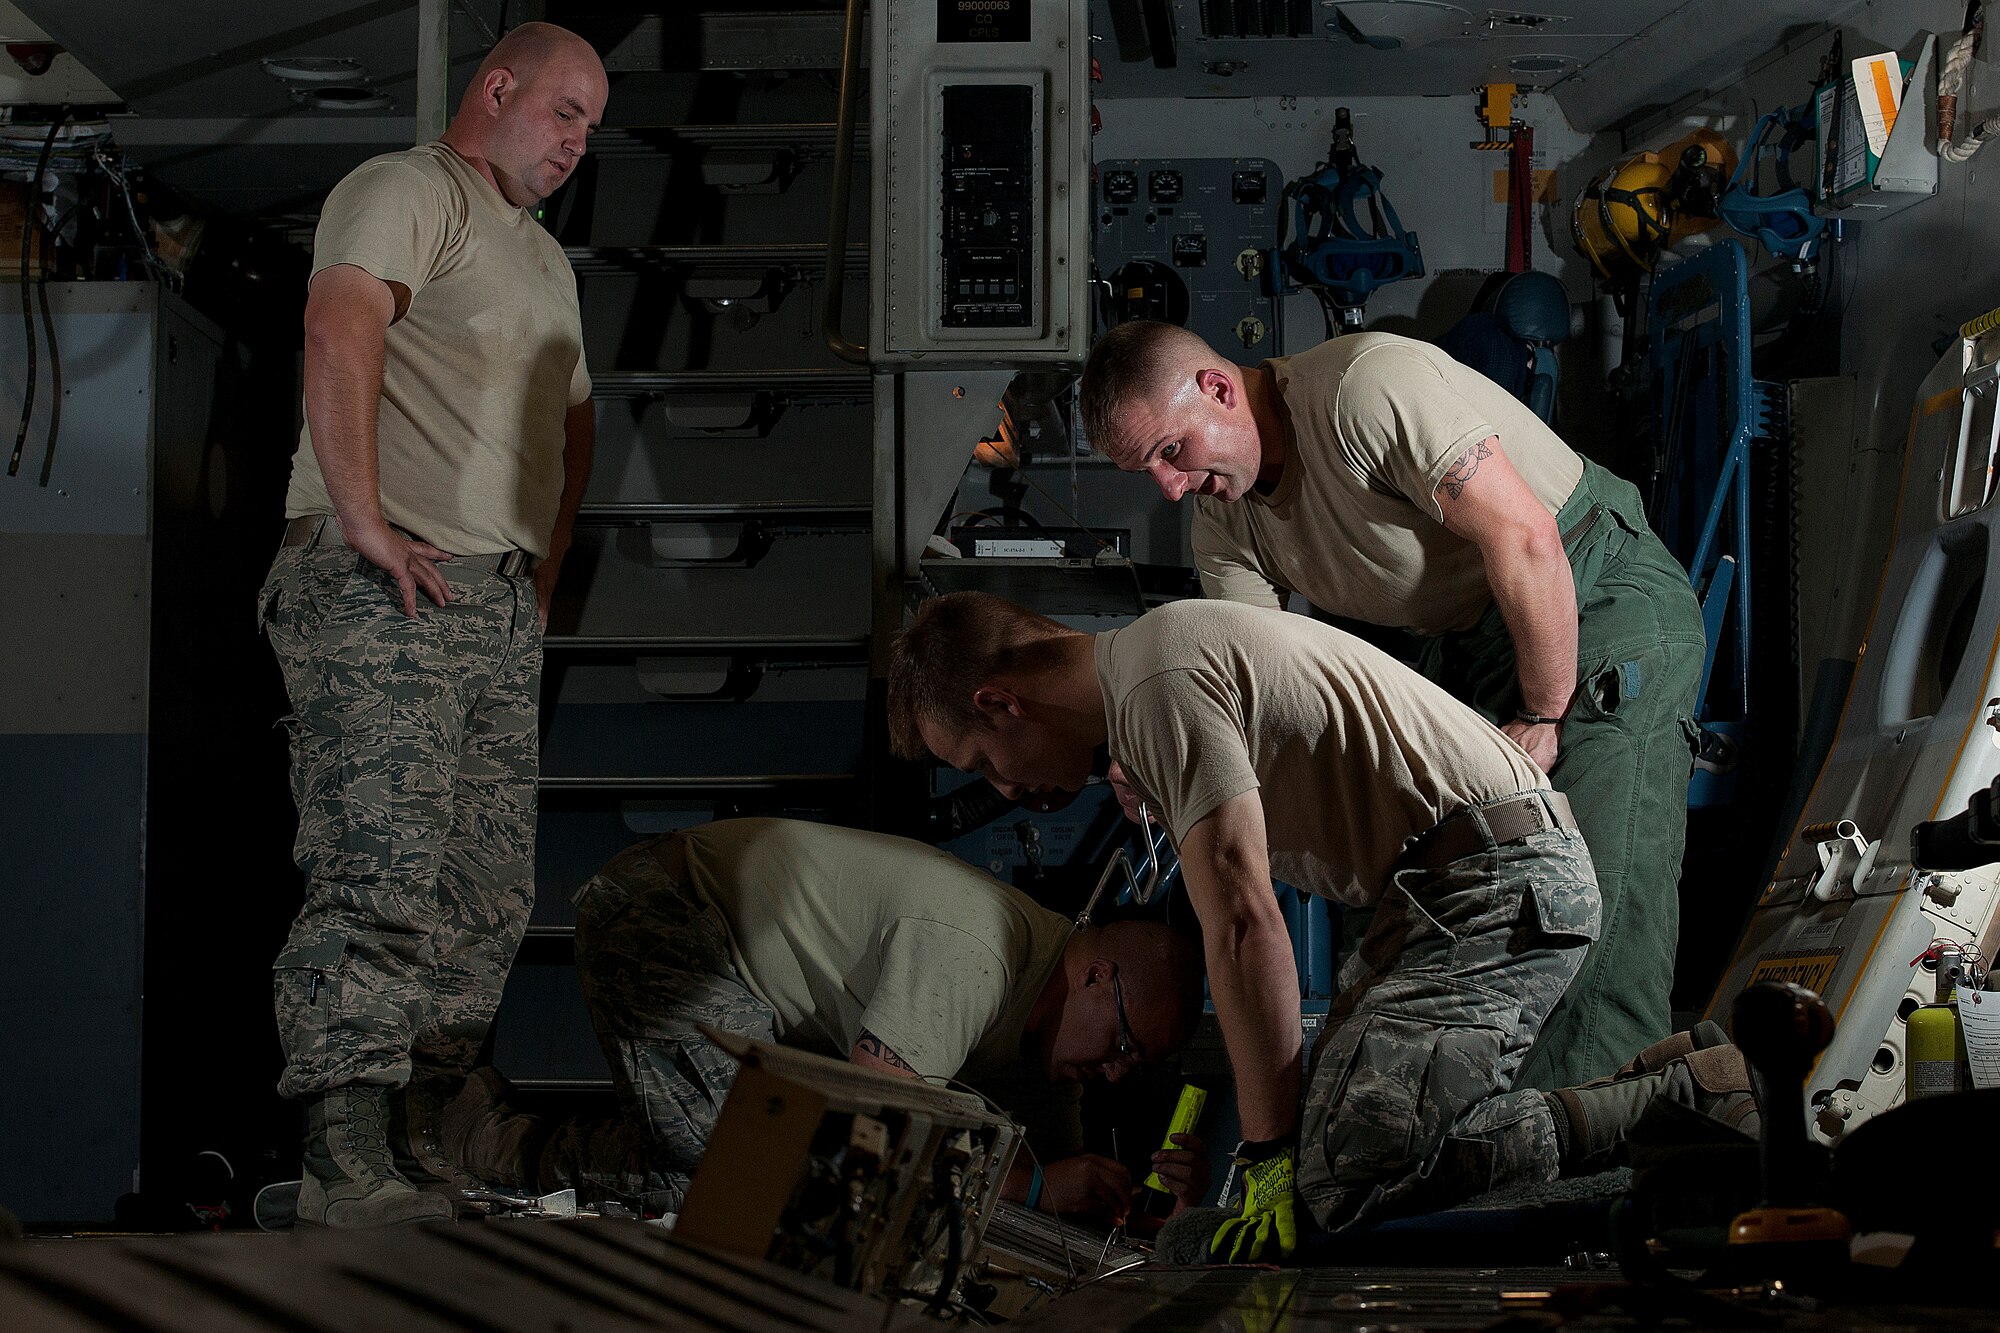 III ALTUS AIR FORCE BASE, Okla. – Members of the 97th Air Mobility Wing Maintenance A-Team inspect the airdrop railings of a C-17 Globemaster III cargo aircraft during a 720-day home station refurbishing Oct. 10, 2013. Routine maintenance of the railings include cleaning and checking for locking malfunctions as well as any internal structural damages or stressors. The airdrop system is used to facilitate loading and unloading which accounts for a vital part of Altus AFB’s mission. (U.S. Air Force photo by Senior Airman Jesse Lopez/Released)